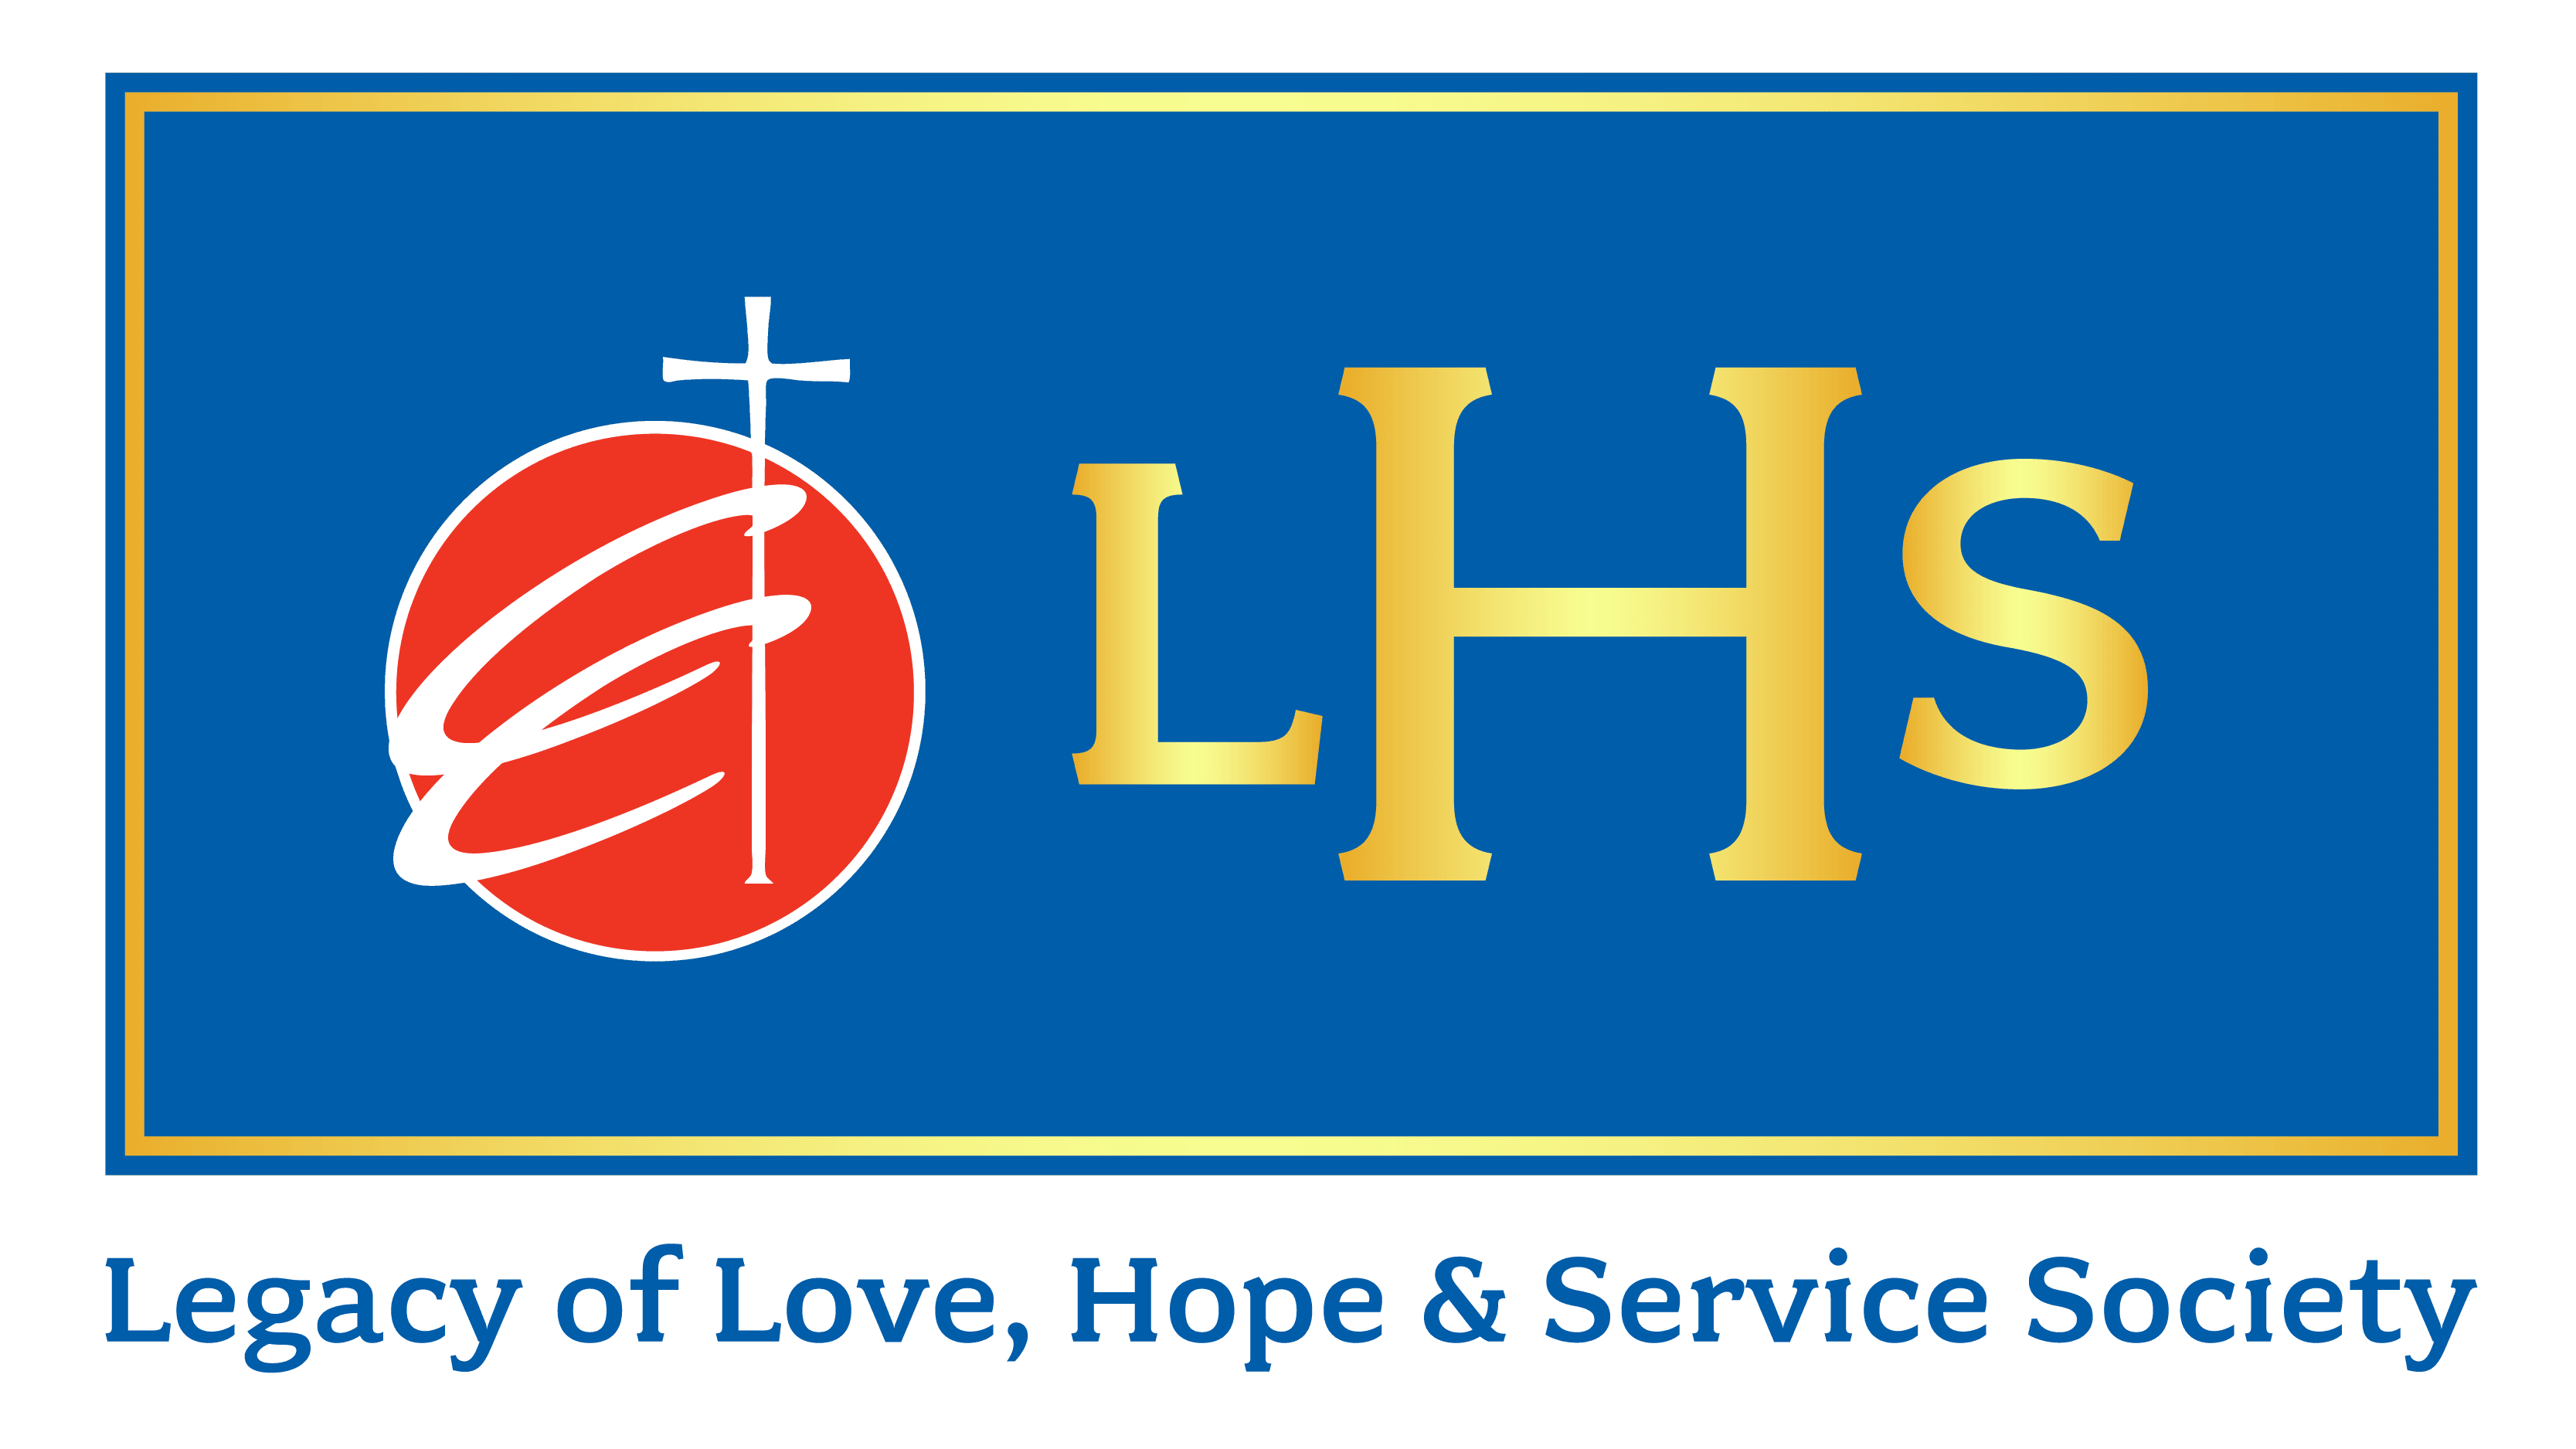 Legacy of Love, Hope & Service Society